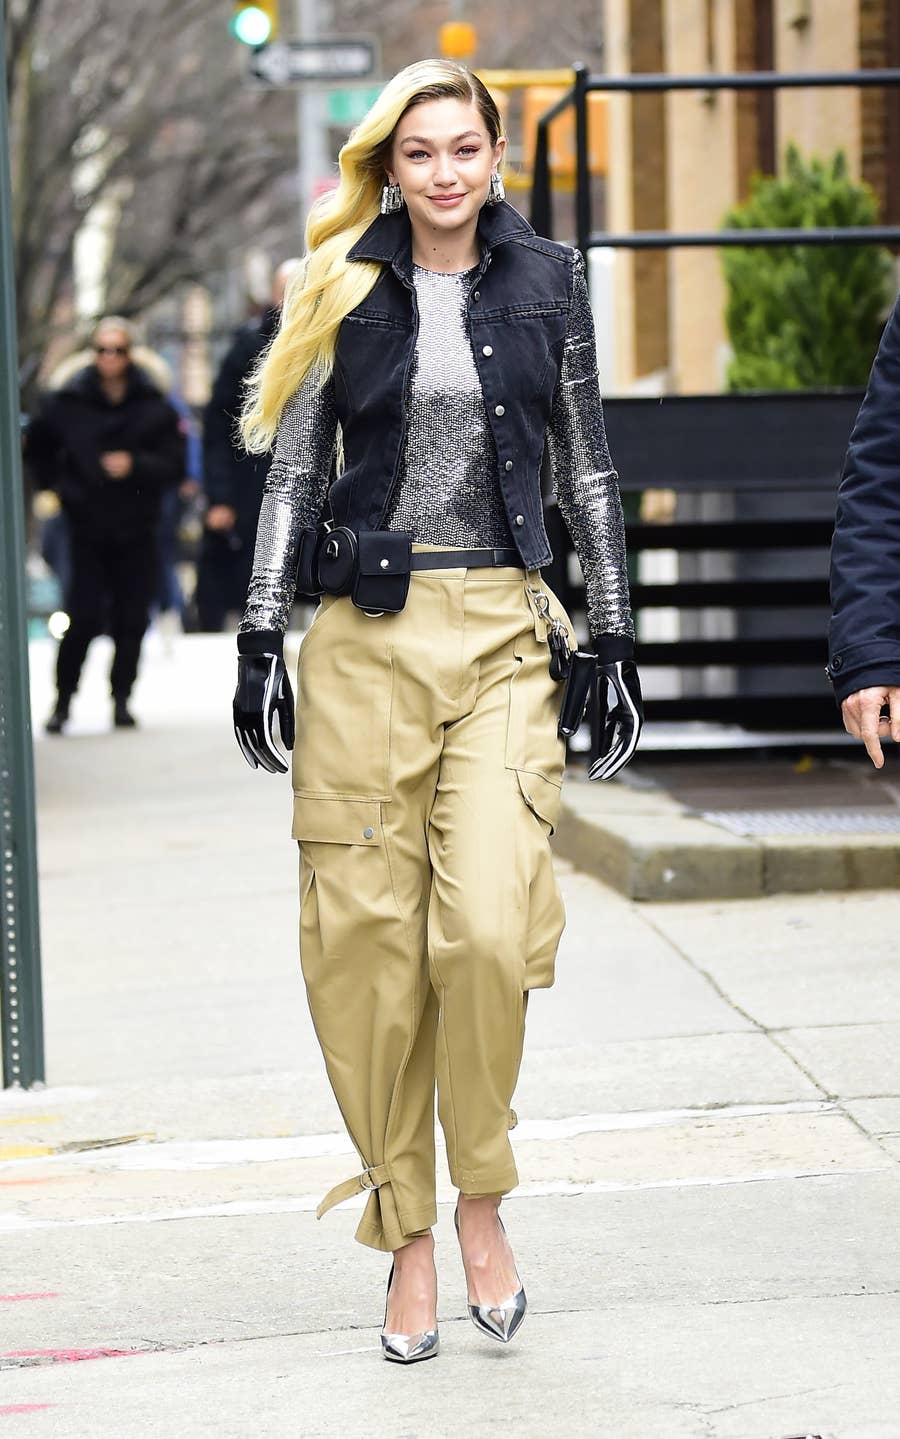 How street style stars in Paris have turned cargo pants into a